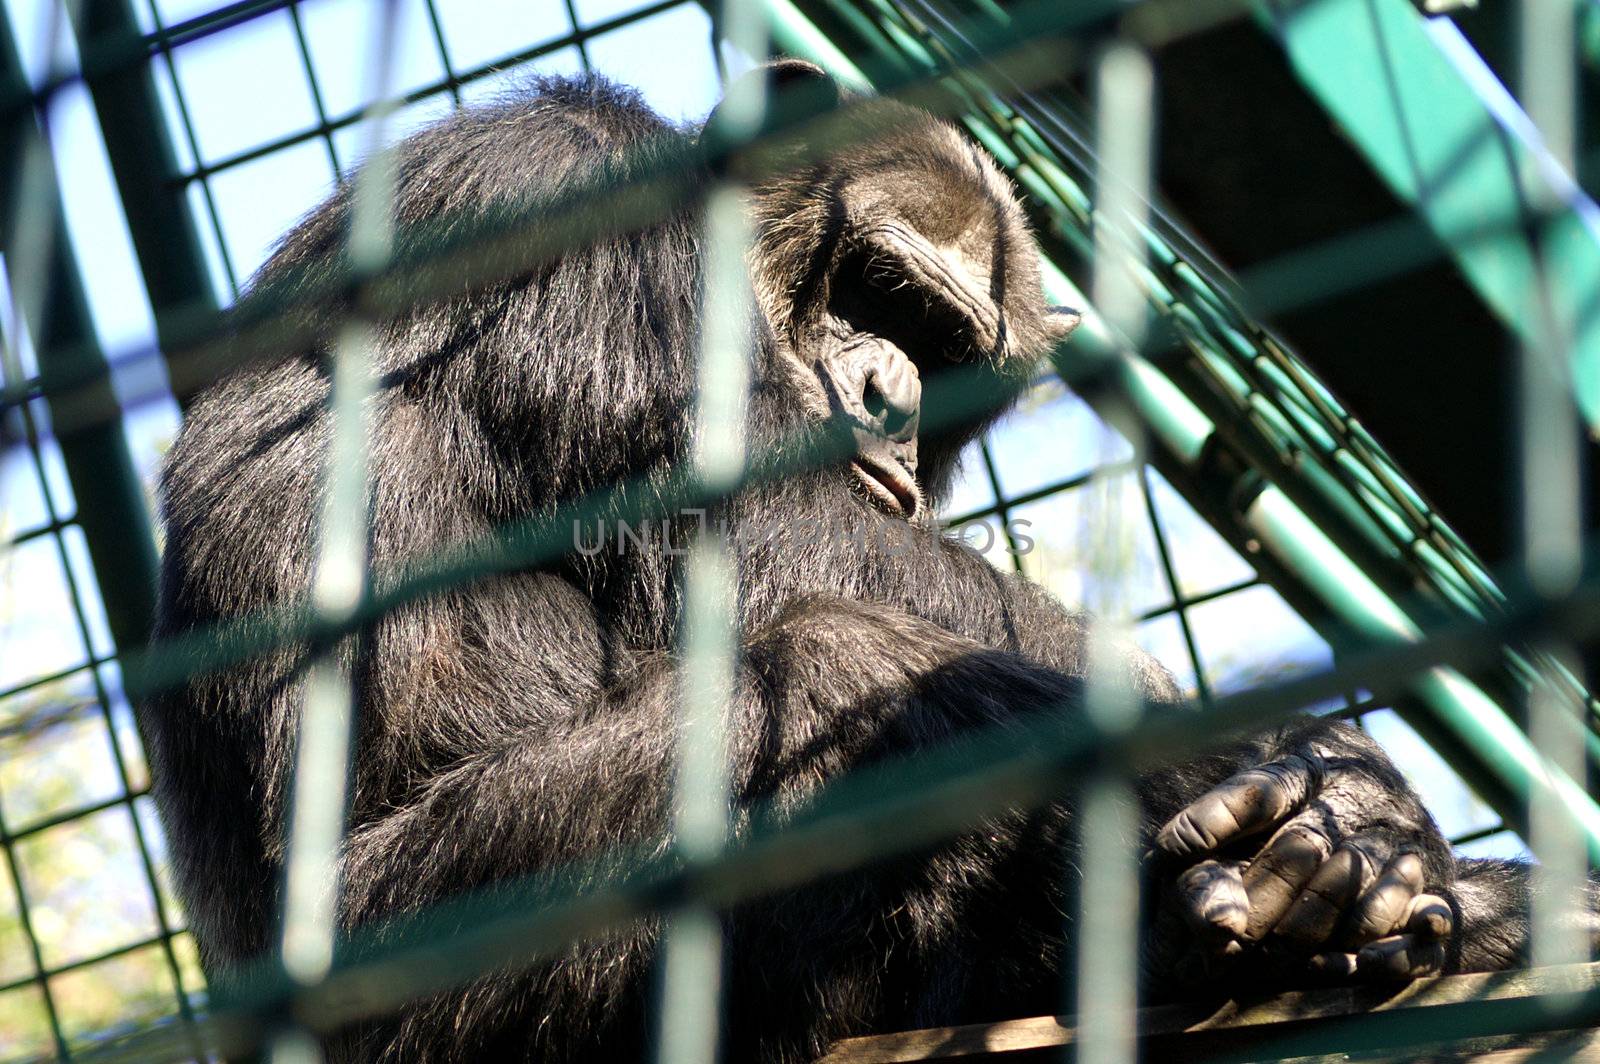 Monkey man in cage by photochecker